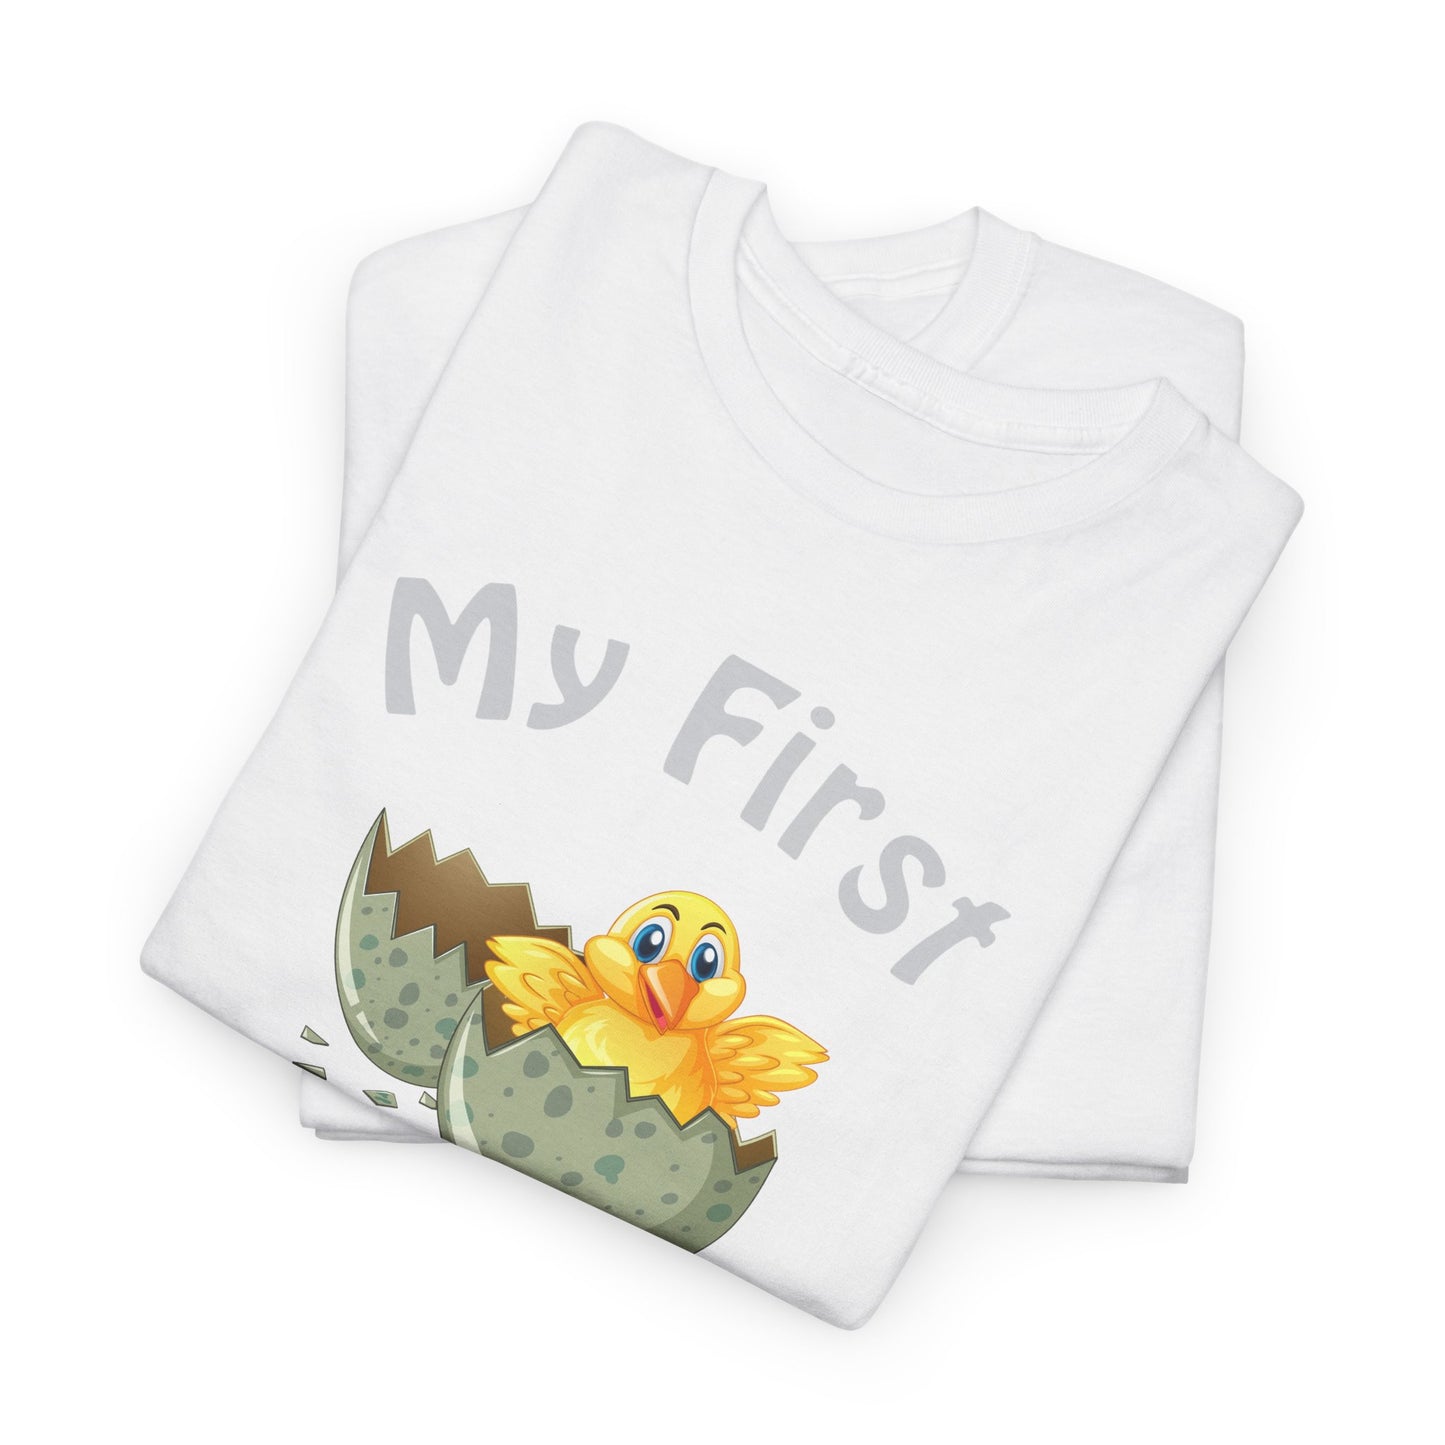 My First Father's Day - Hatching Chick - Est 2024 - Unisex Heavy Cotton Tee